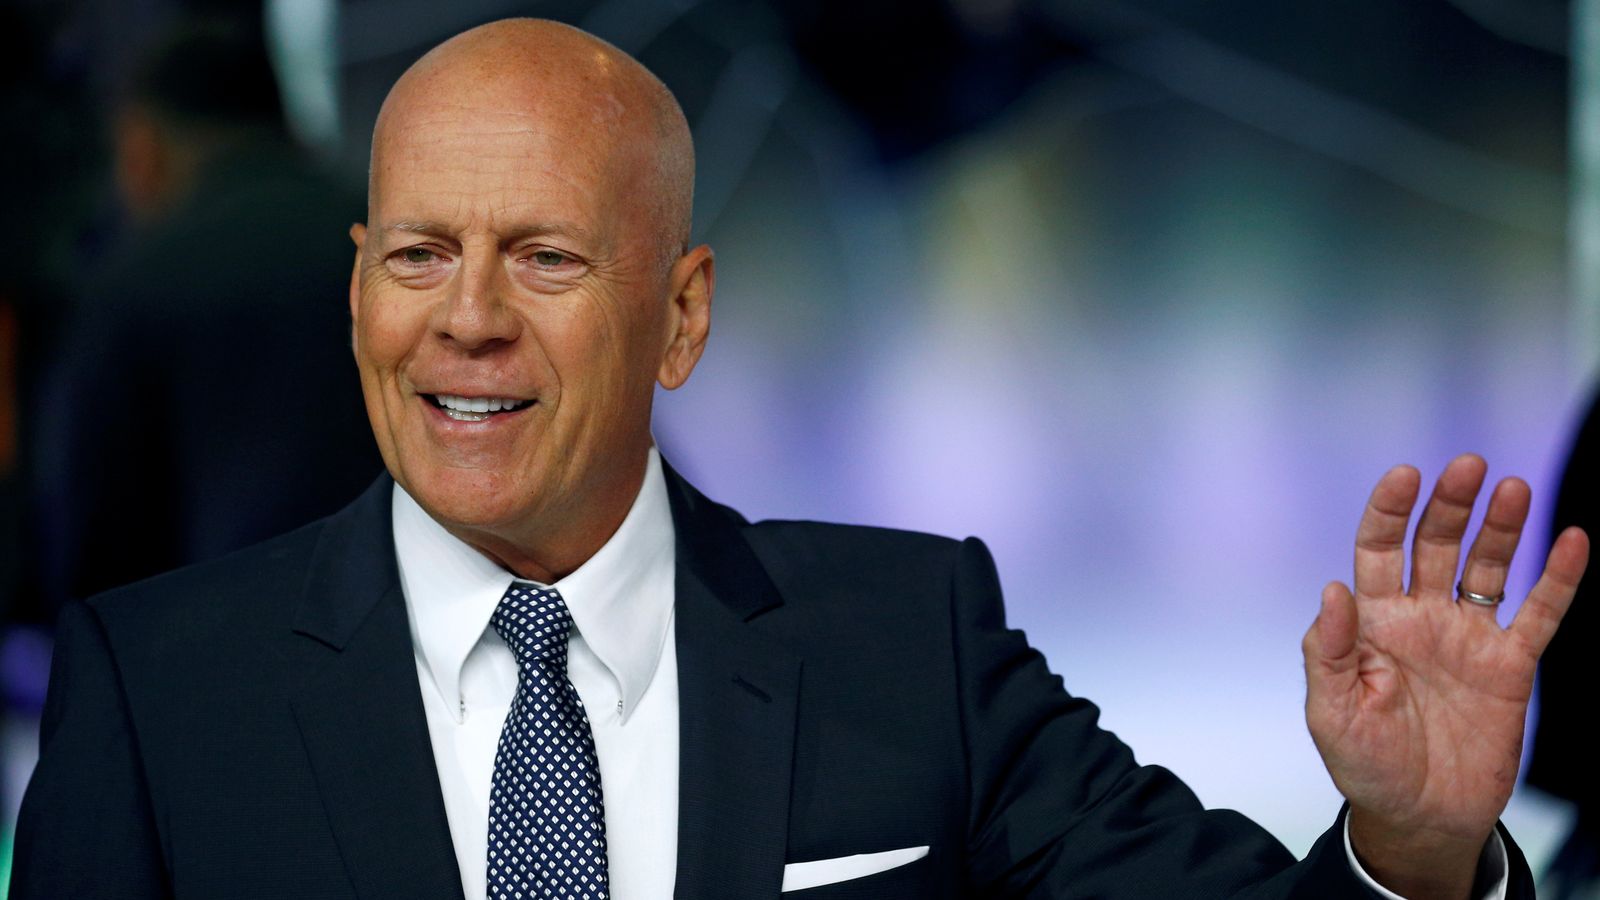 Bruce Willis: Hollywood star diagnosed with frontotemporal dementia, family says